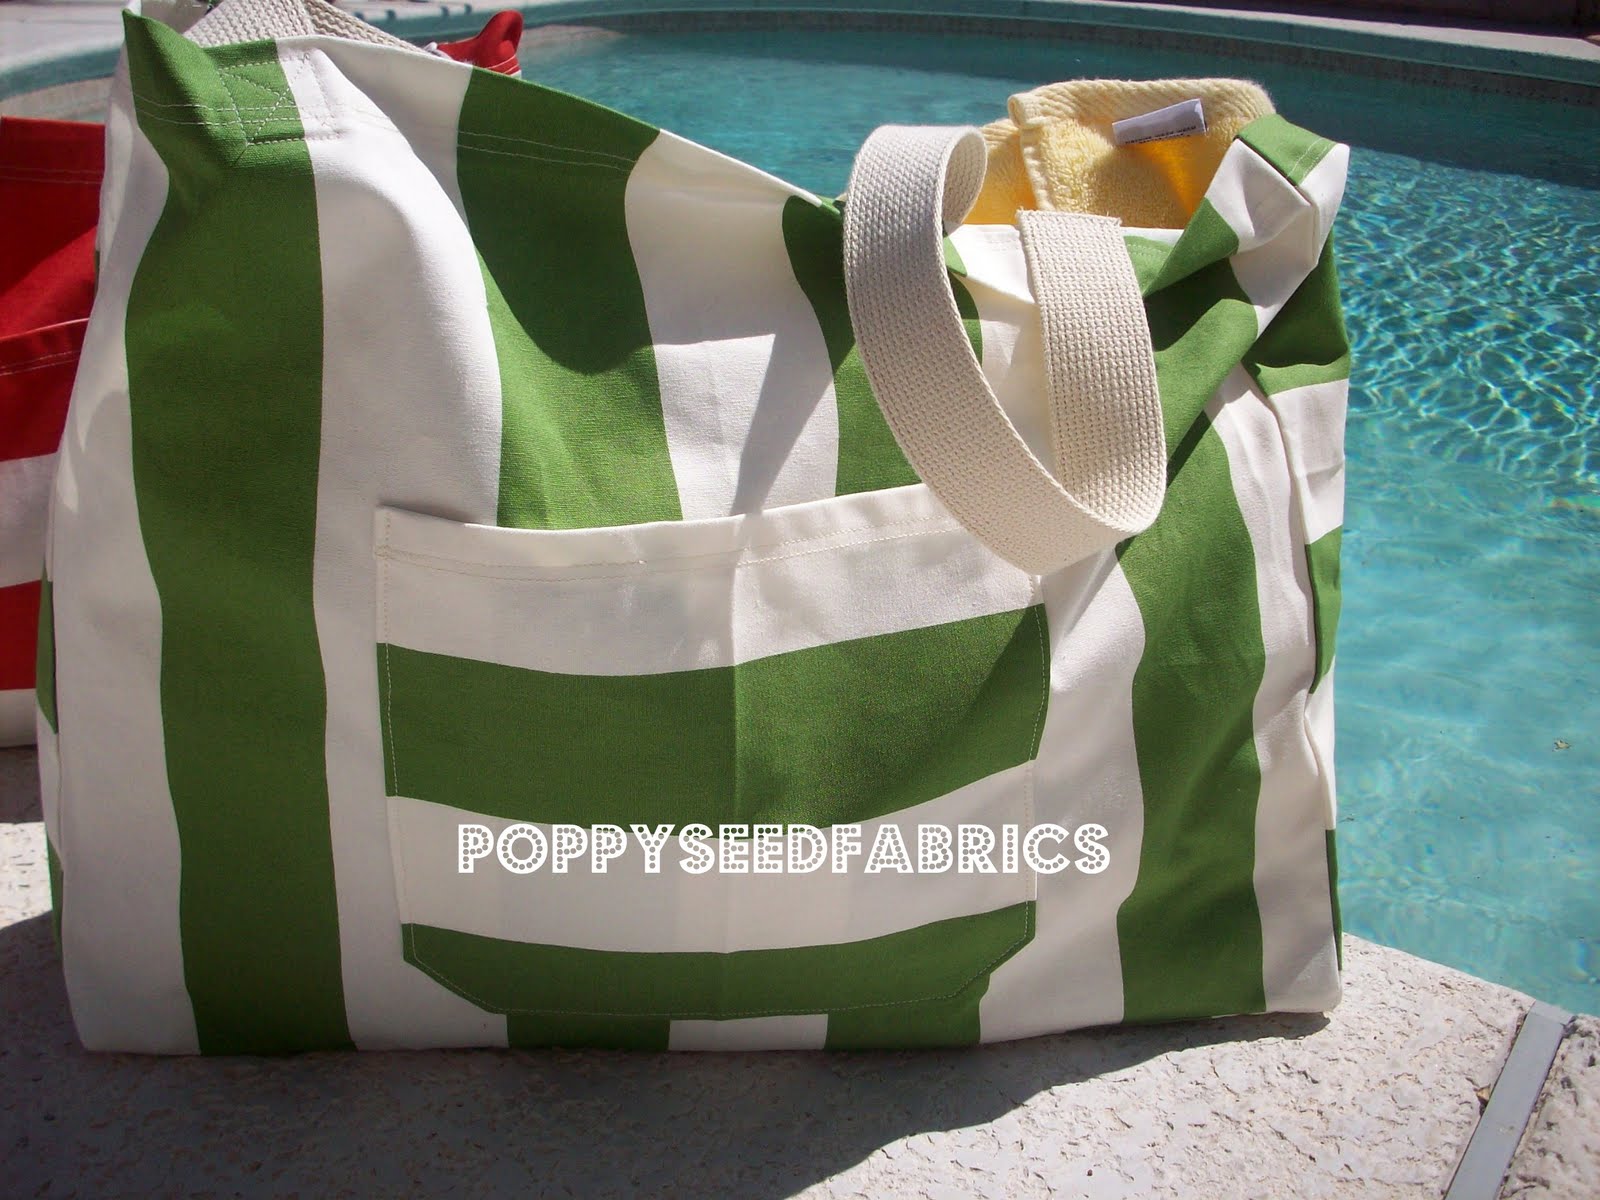 update: go here for our latest beach bag!